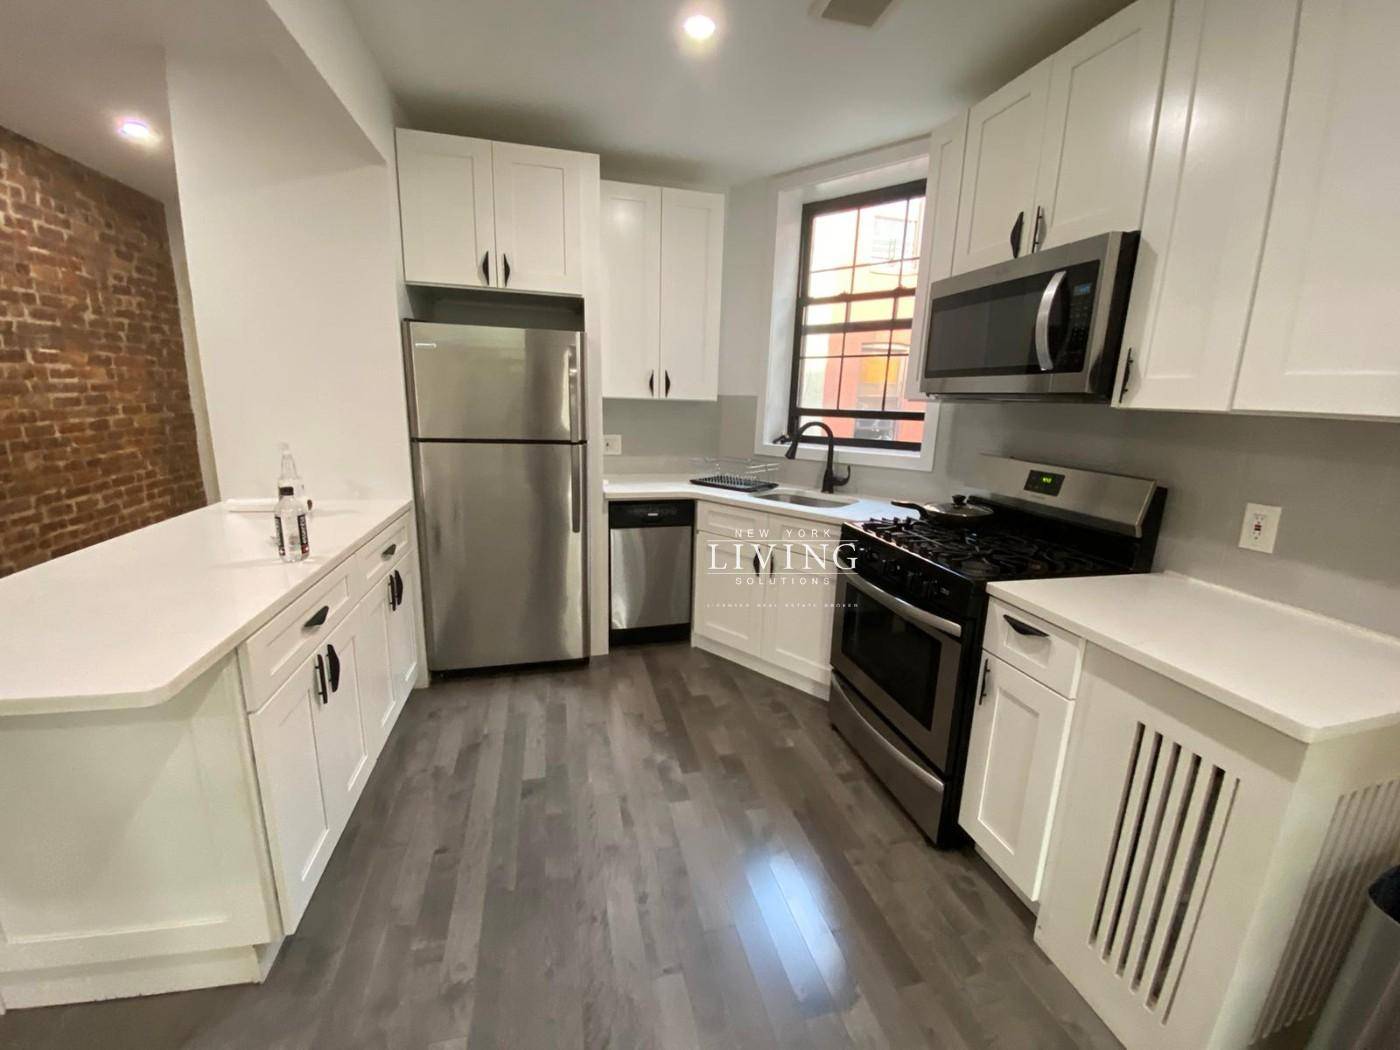 STUNNING UNIT ON 2ND FLOOR EAST NEW YORKHALF A BLOCK FROM J, 2, 3 TRAIN BUS AT THE CORNERSTUNNING NEWLY RENOVATED BRICK WALL ACCENT NEW KITCHEN WITH STAINLESS STEEL APPLIANCES ...